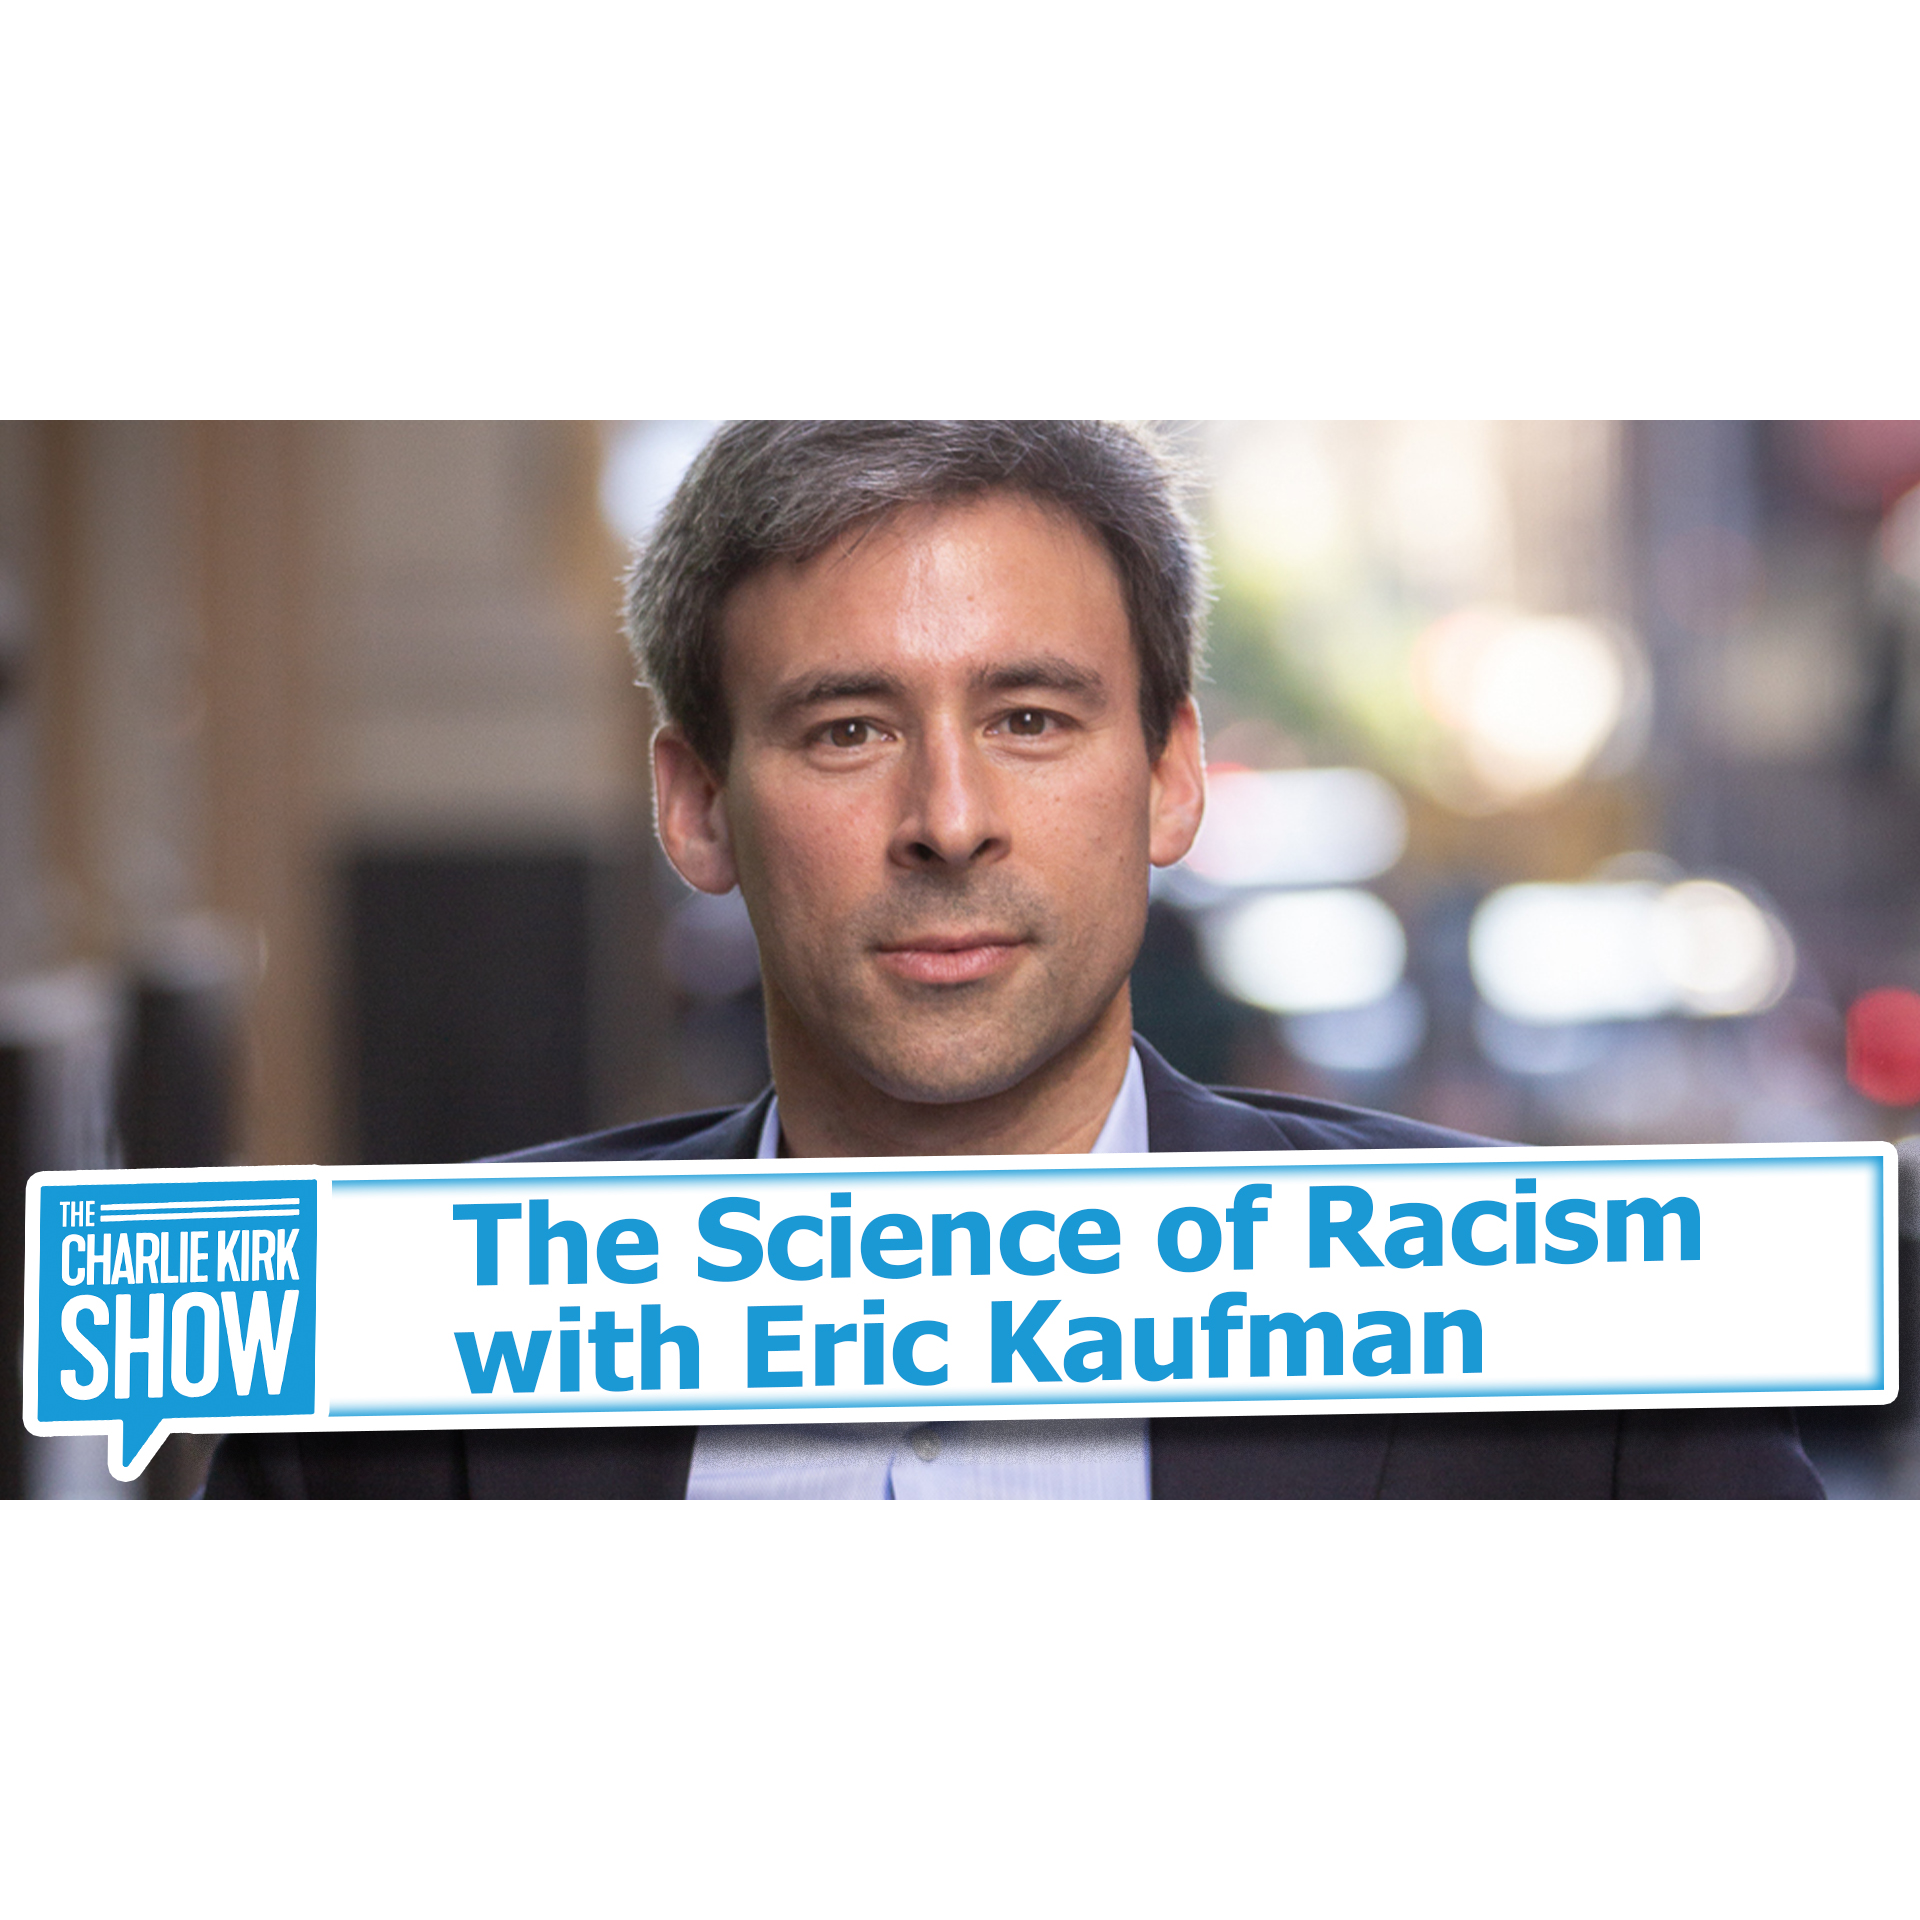 The Science of Racism with Eric Kaufman